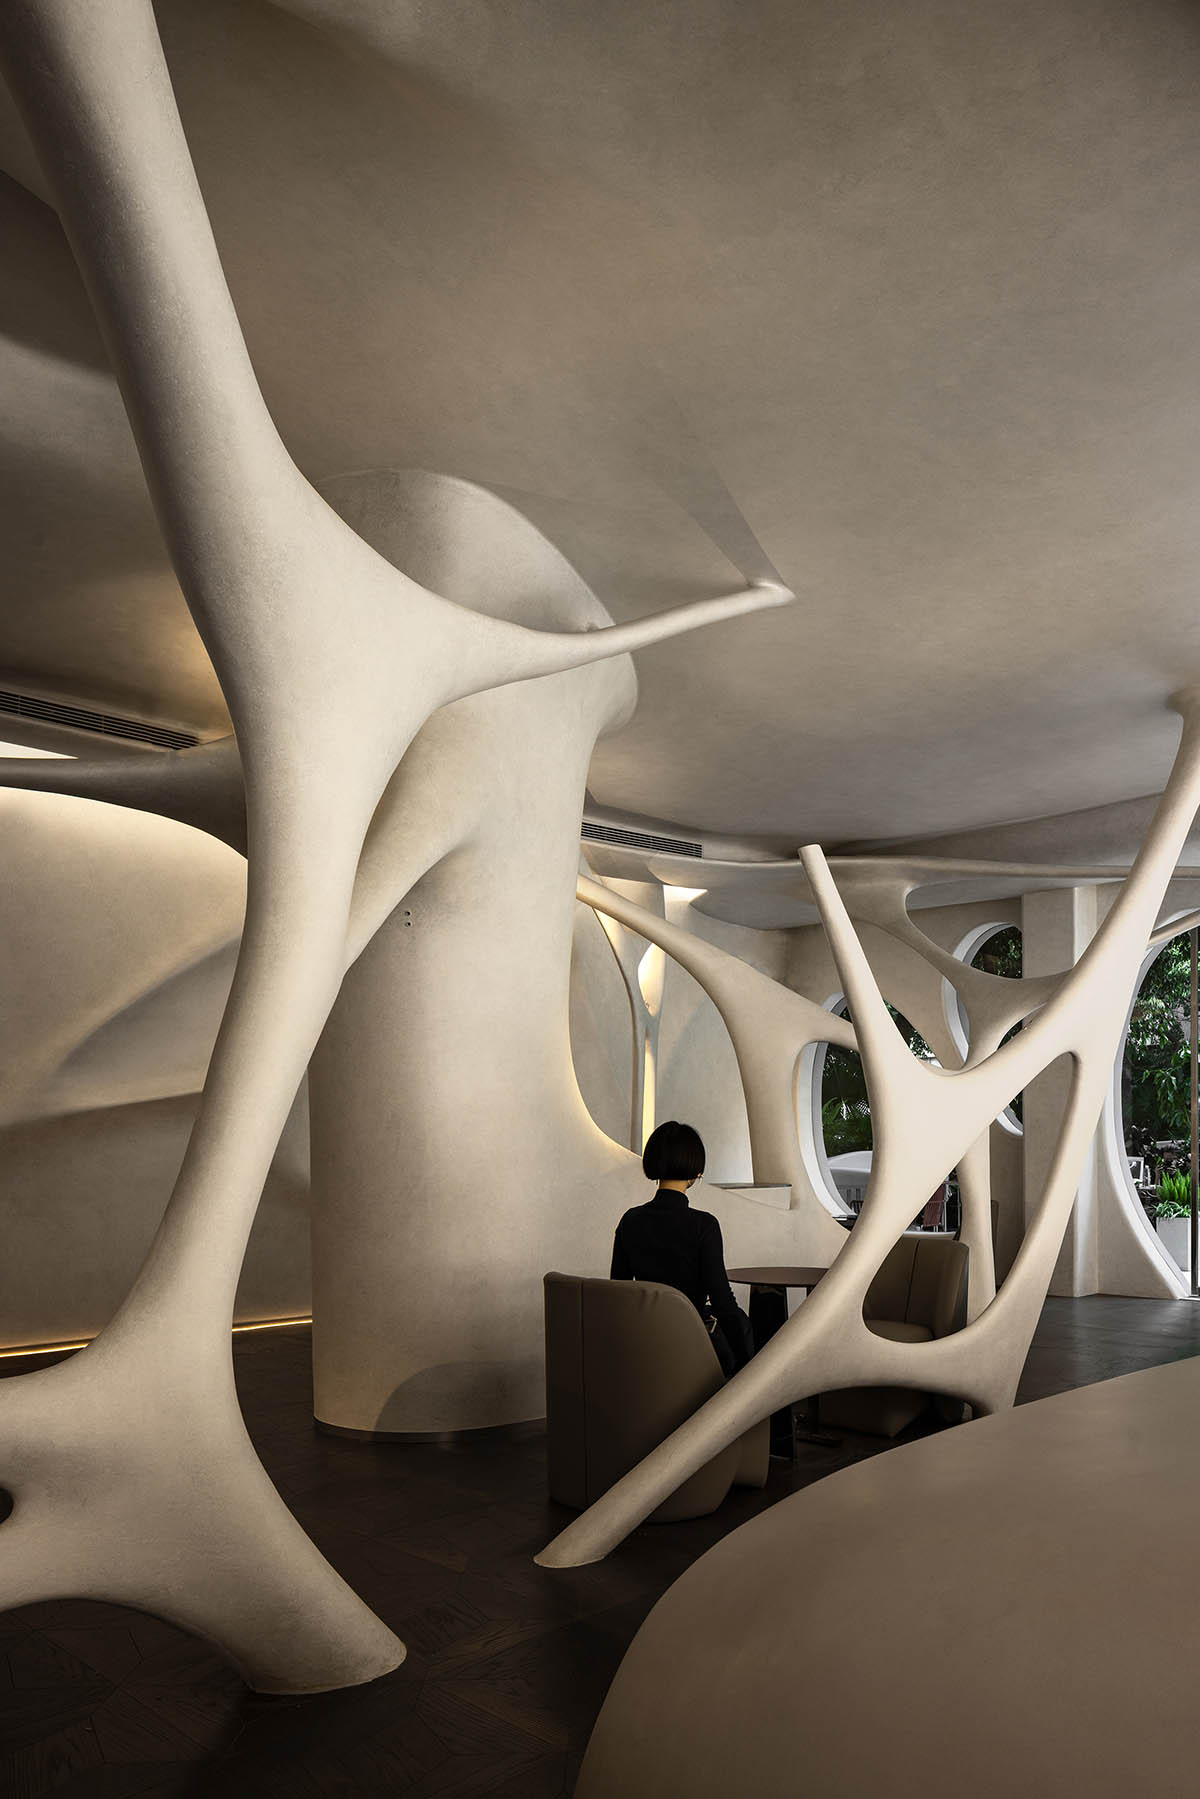 Neuron-like interior by AD ARCHITECTURE combines purity and complexity for cafe and bar in Shenzhen